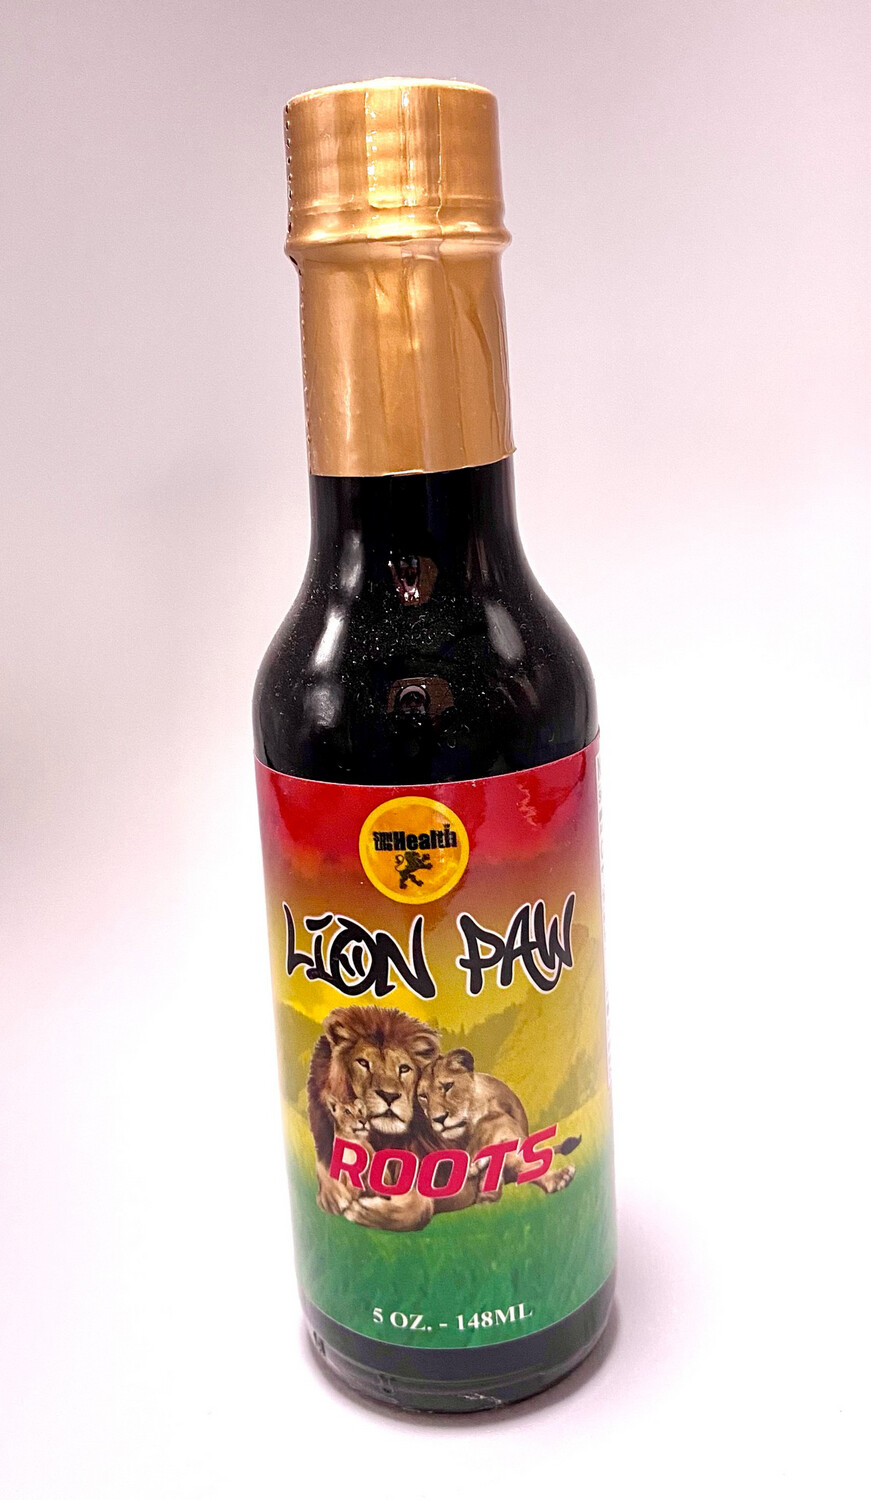 Lion Paw Roots Drink